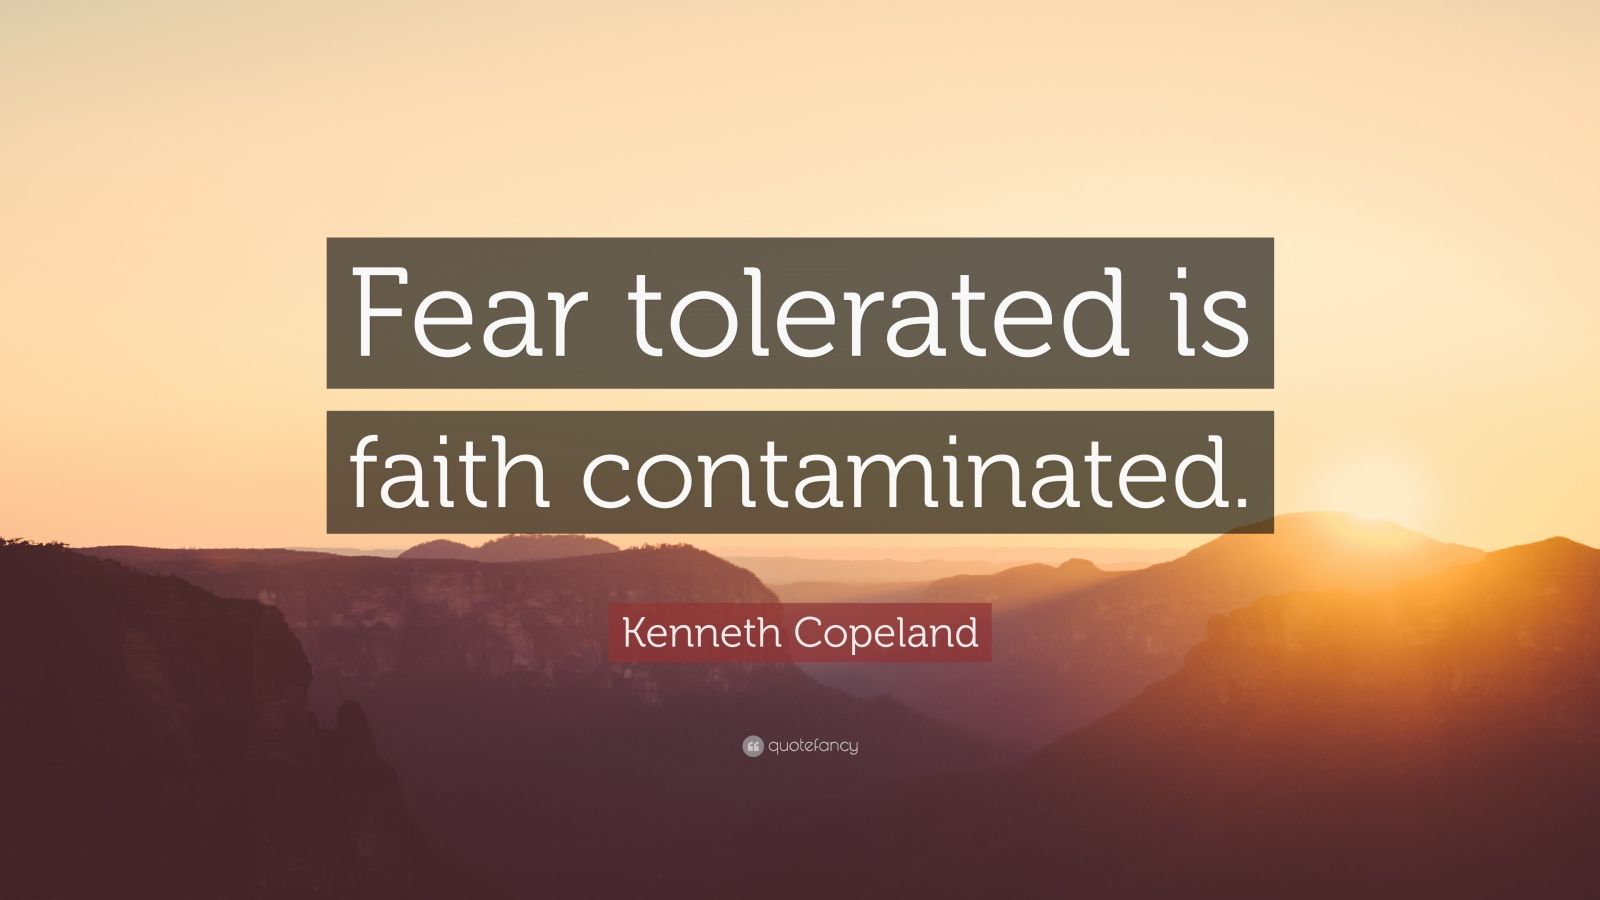 Kenneth Copeland Quotes (30 wallpapers) - Quotefancy